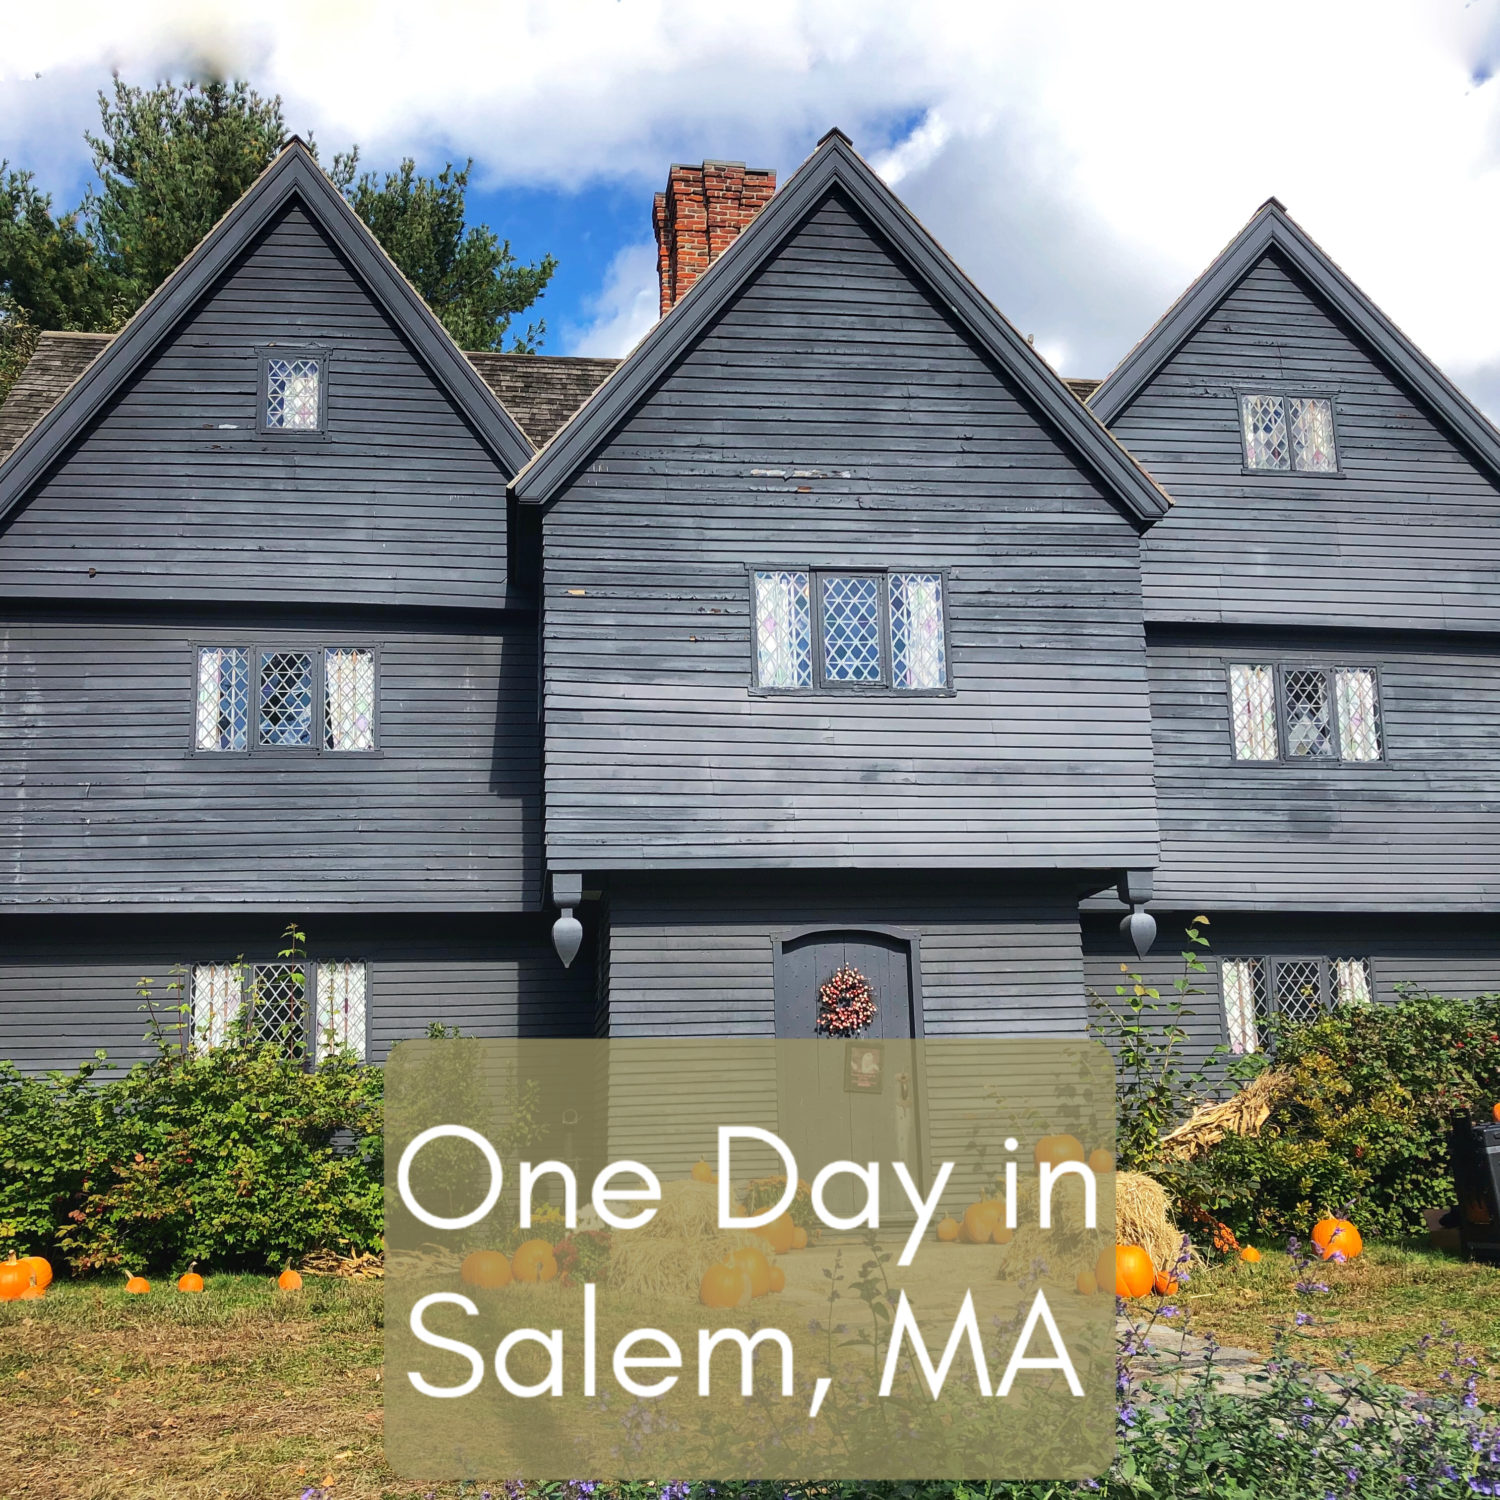 One Day In Salem, MA at Halloween